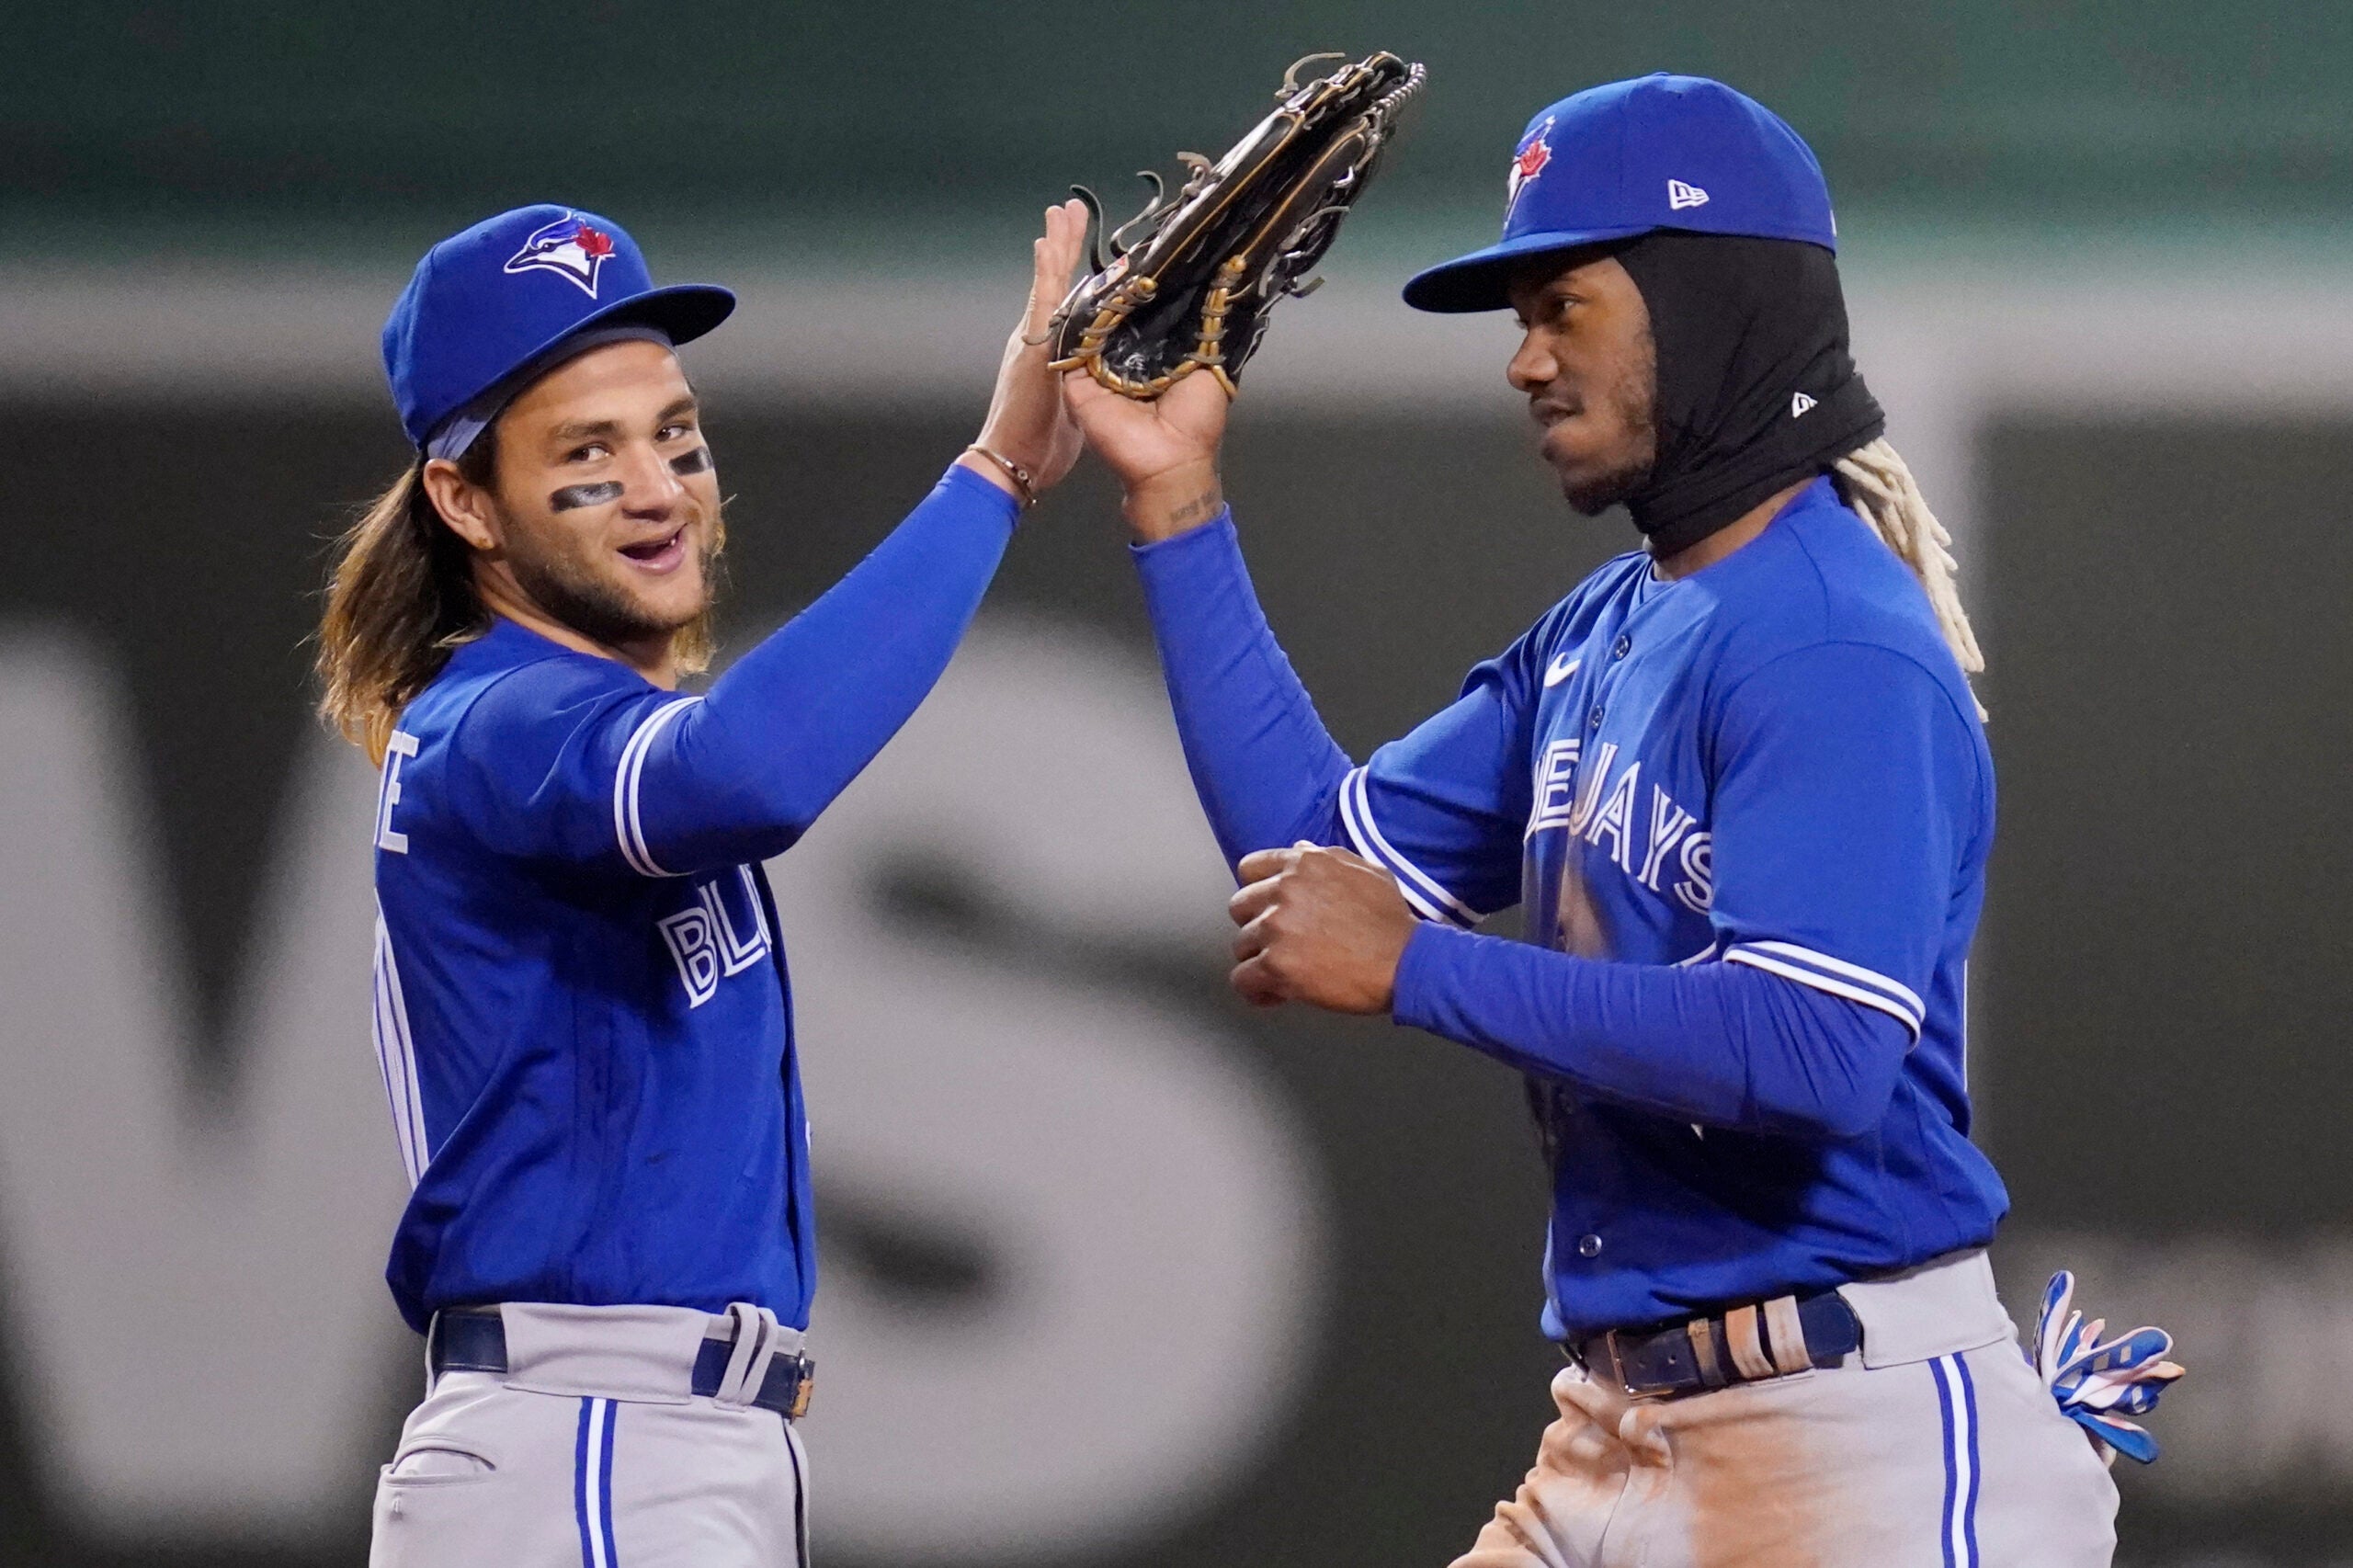 Tapia homer in 5-run second leads Blue Jays over Red Sox 6-1